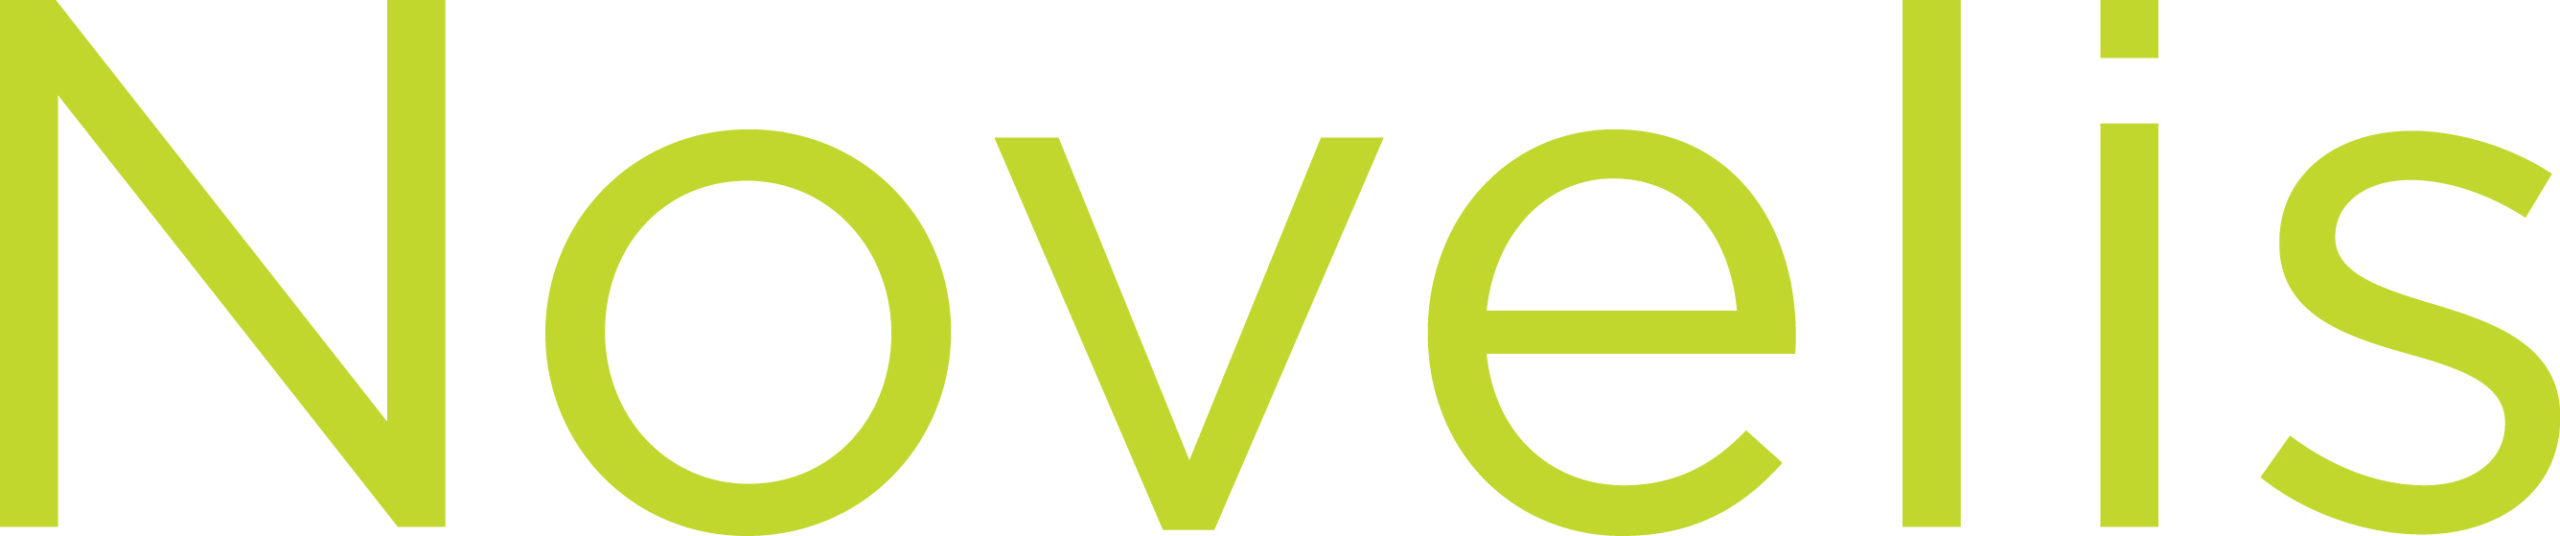 Novelis logo in chartreuse letters on a white background.